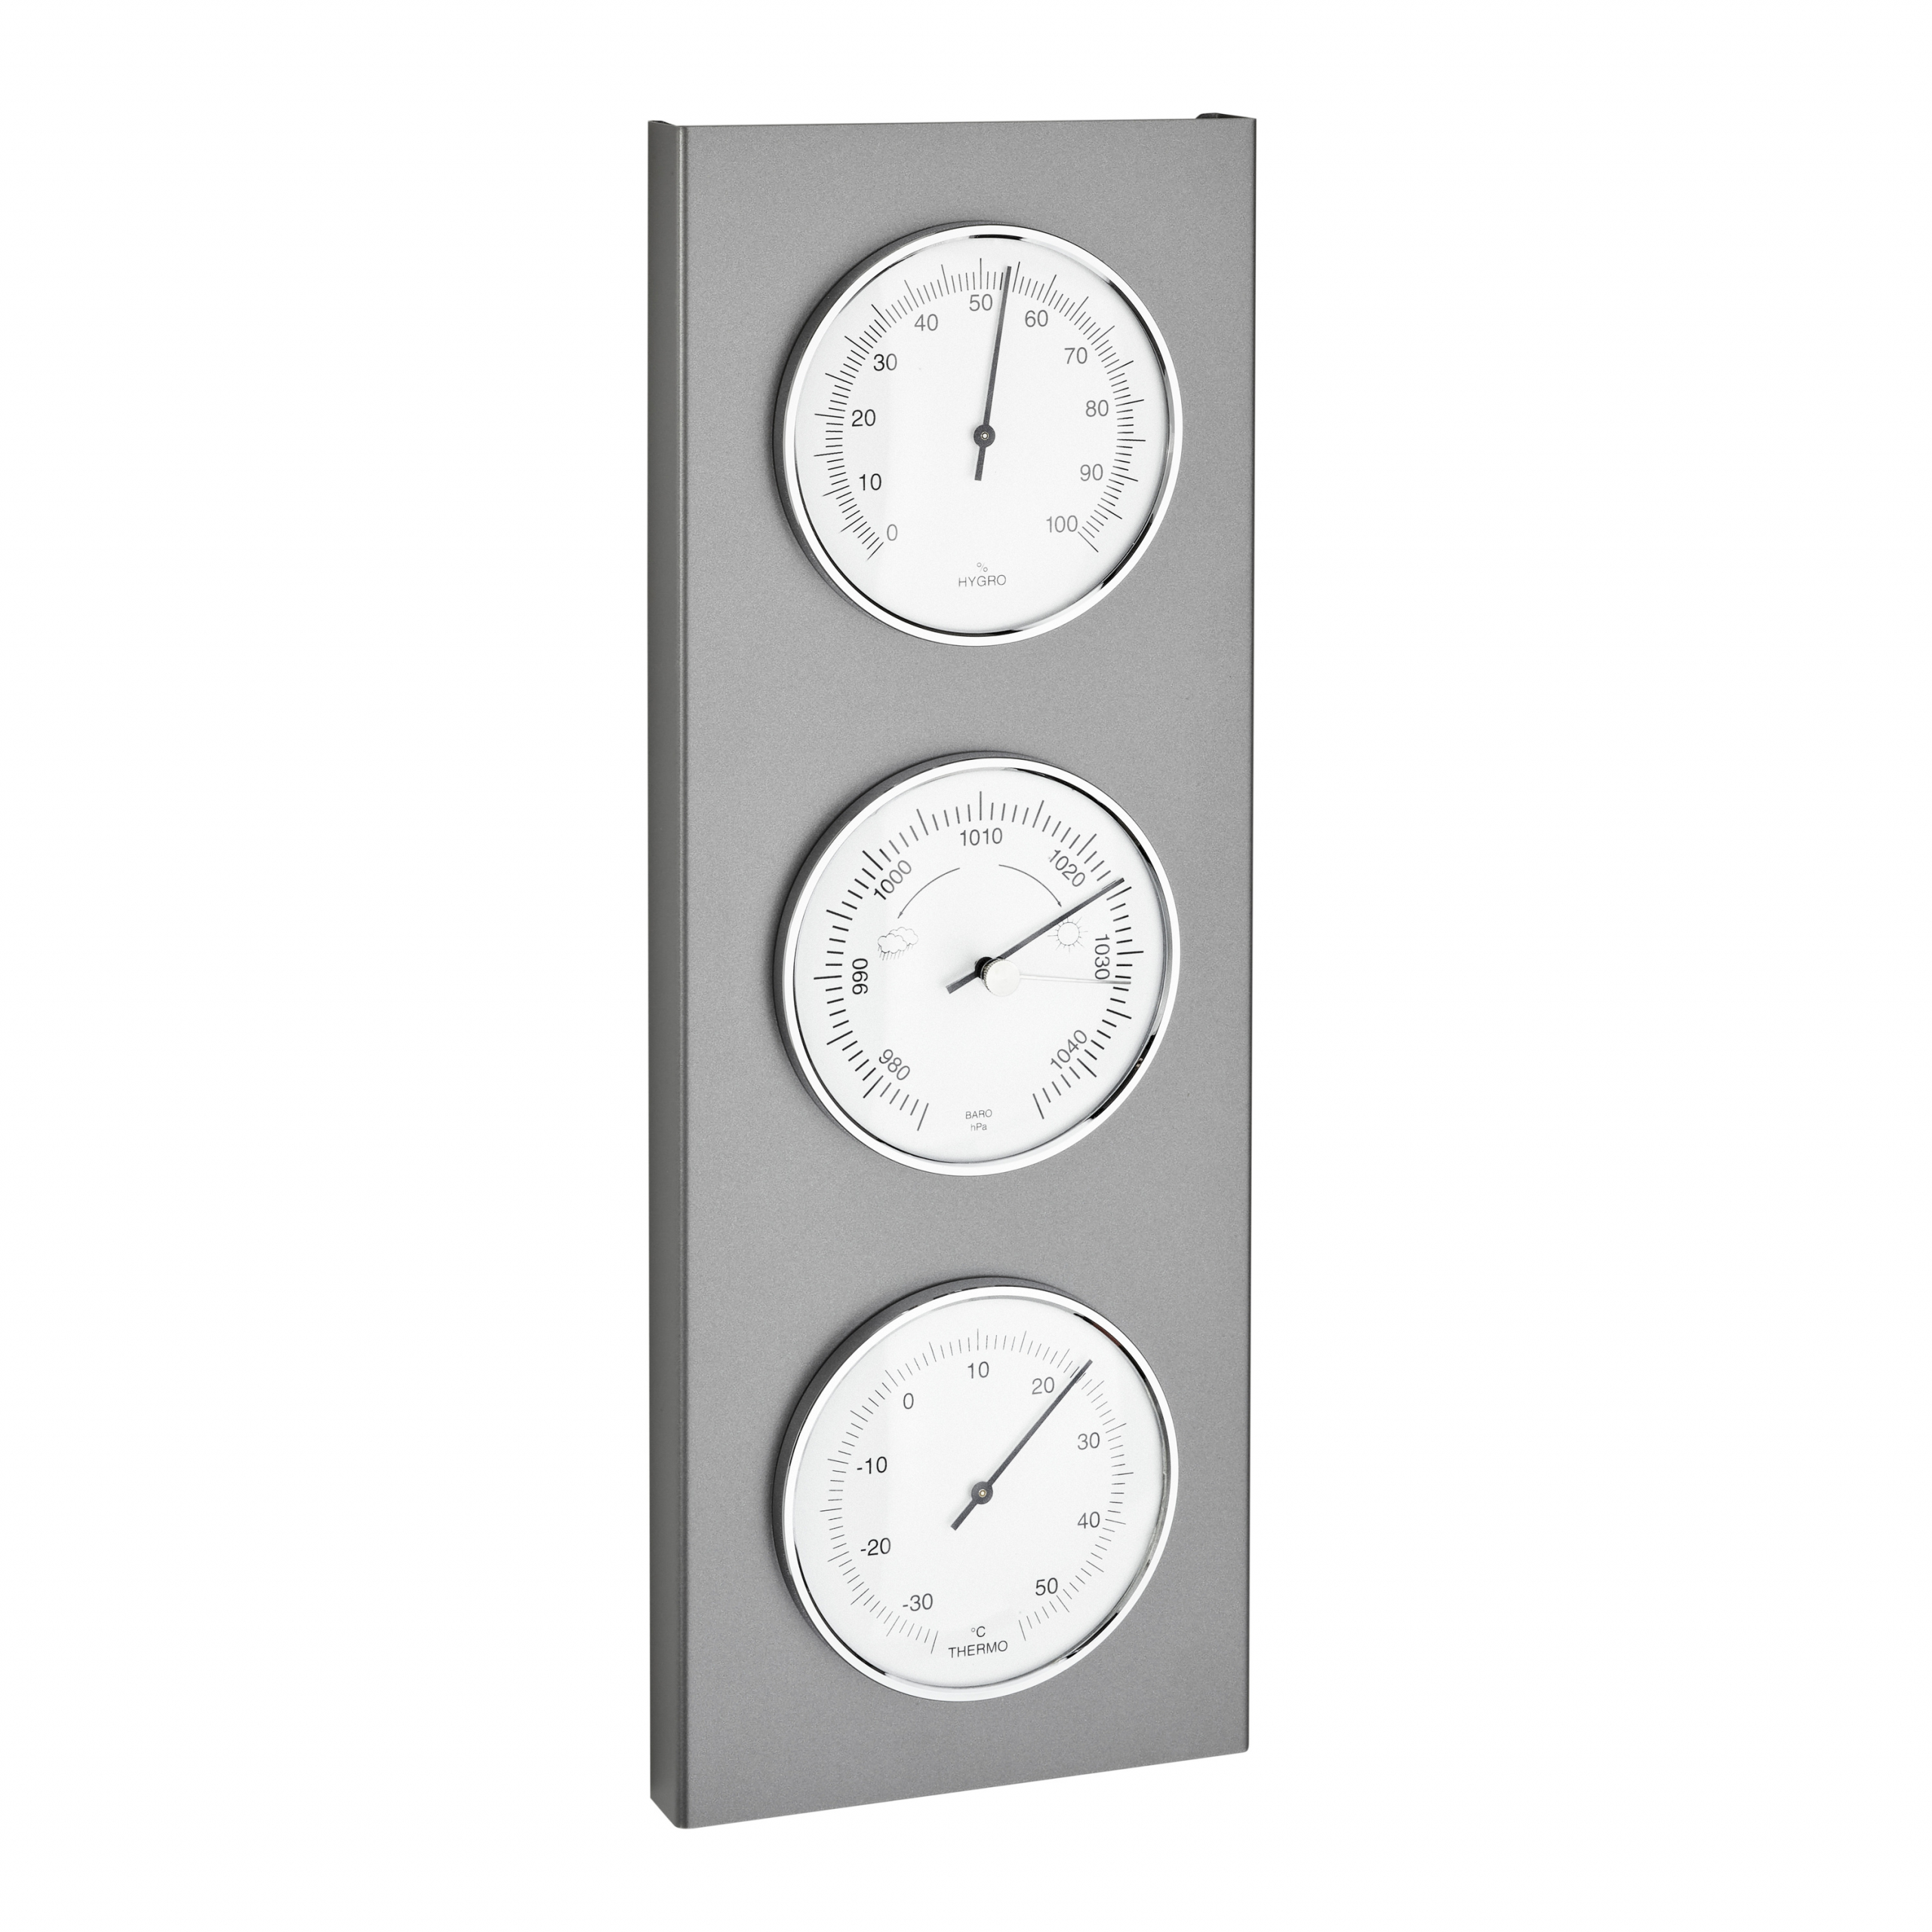 Barometers for The Home,3 in 1 Barometer Weather Station,Barometer  Thermometer Hygrometer,Indoor and Outdoor Weather Barometer,Barometers for  Home